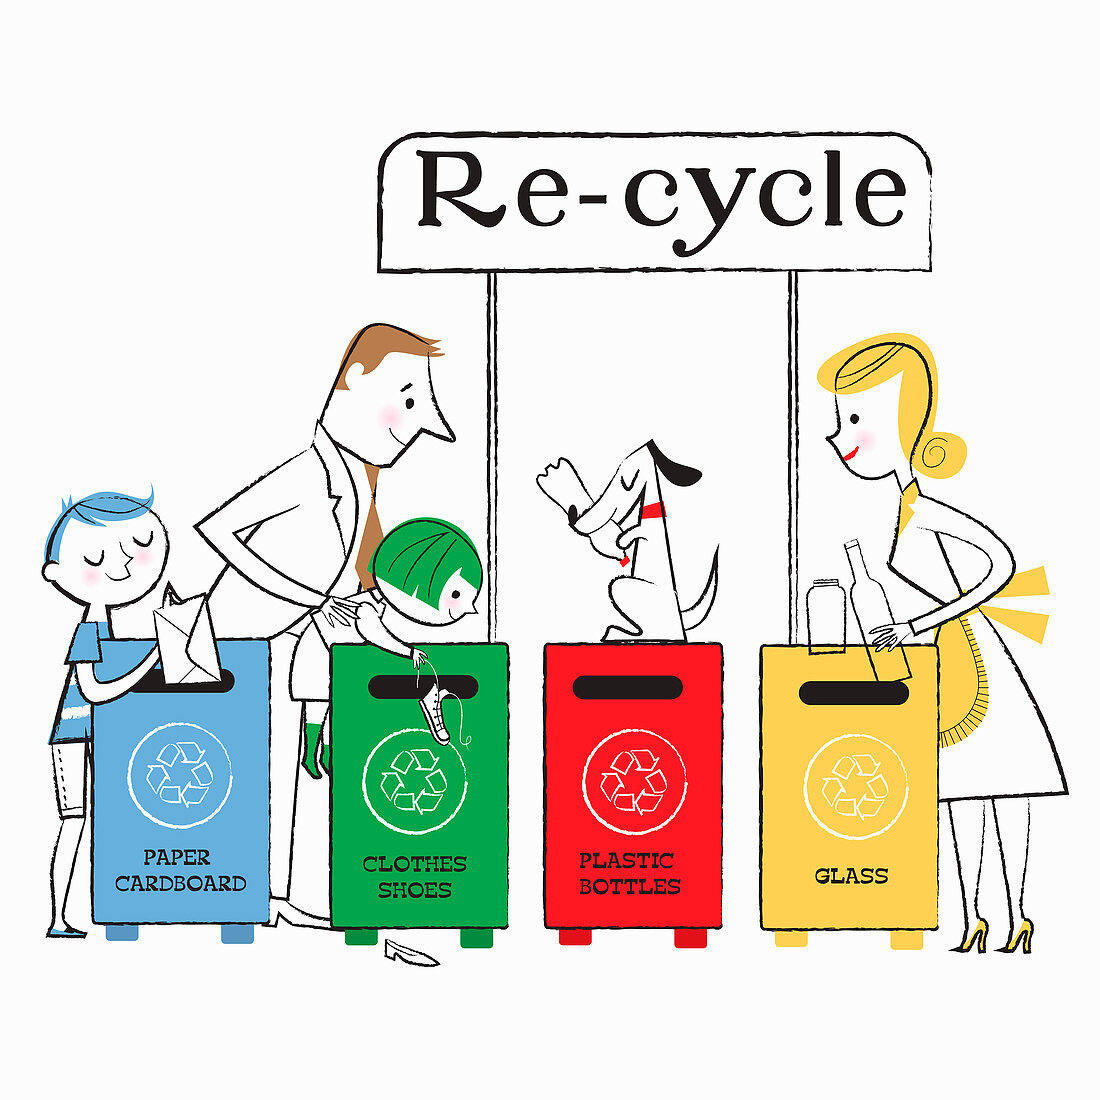 Family using recycling bins, illustration